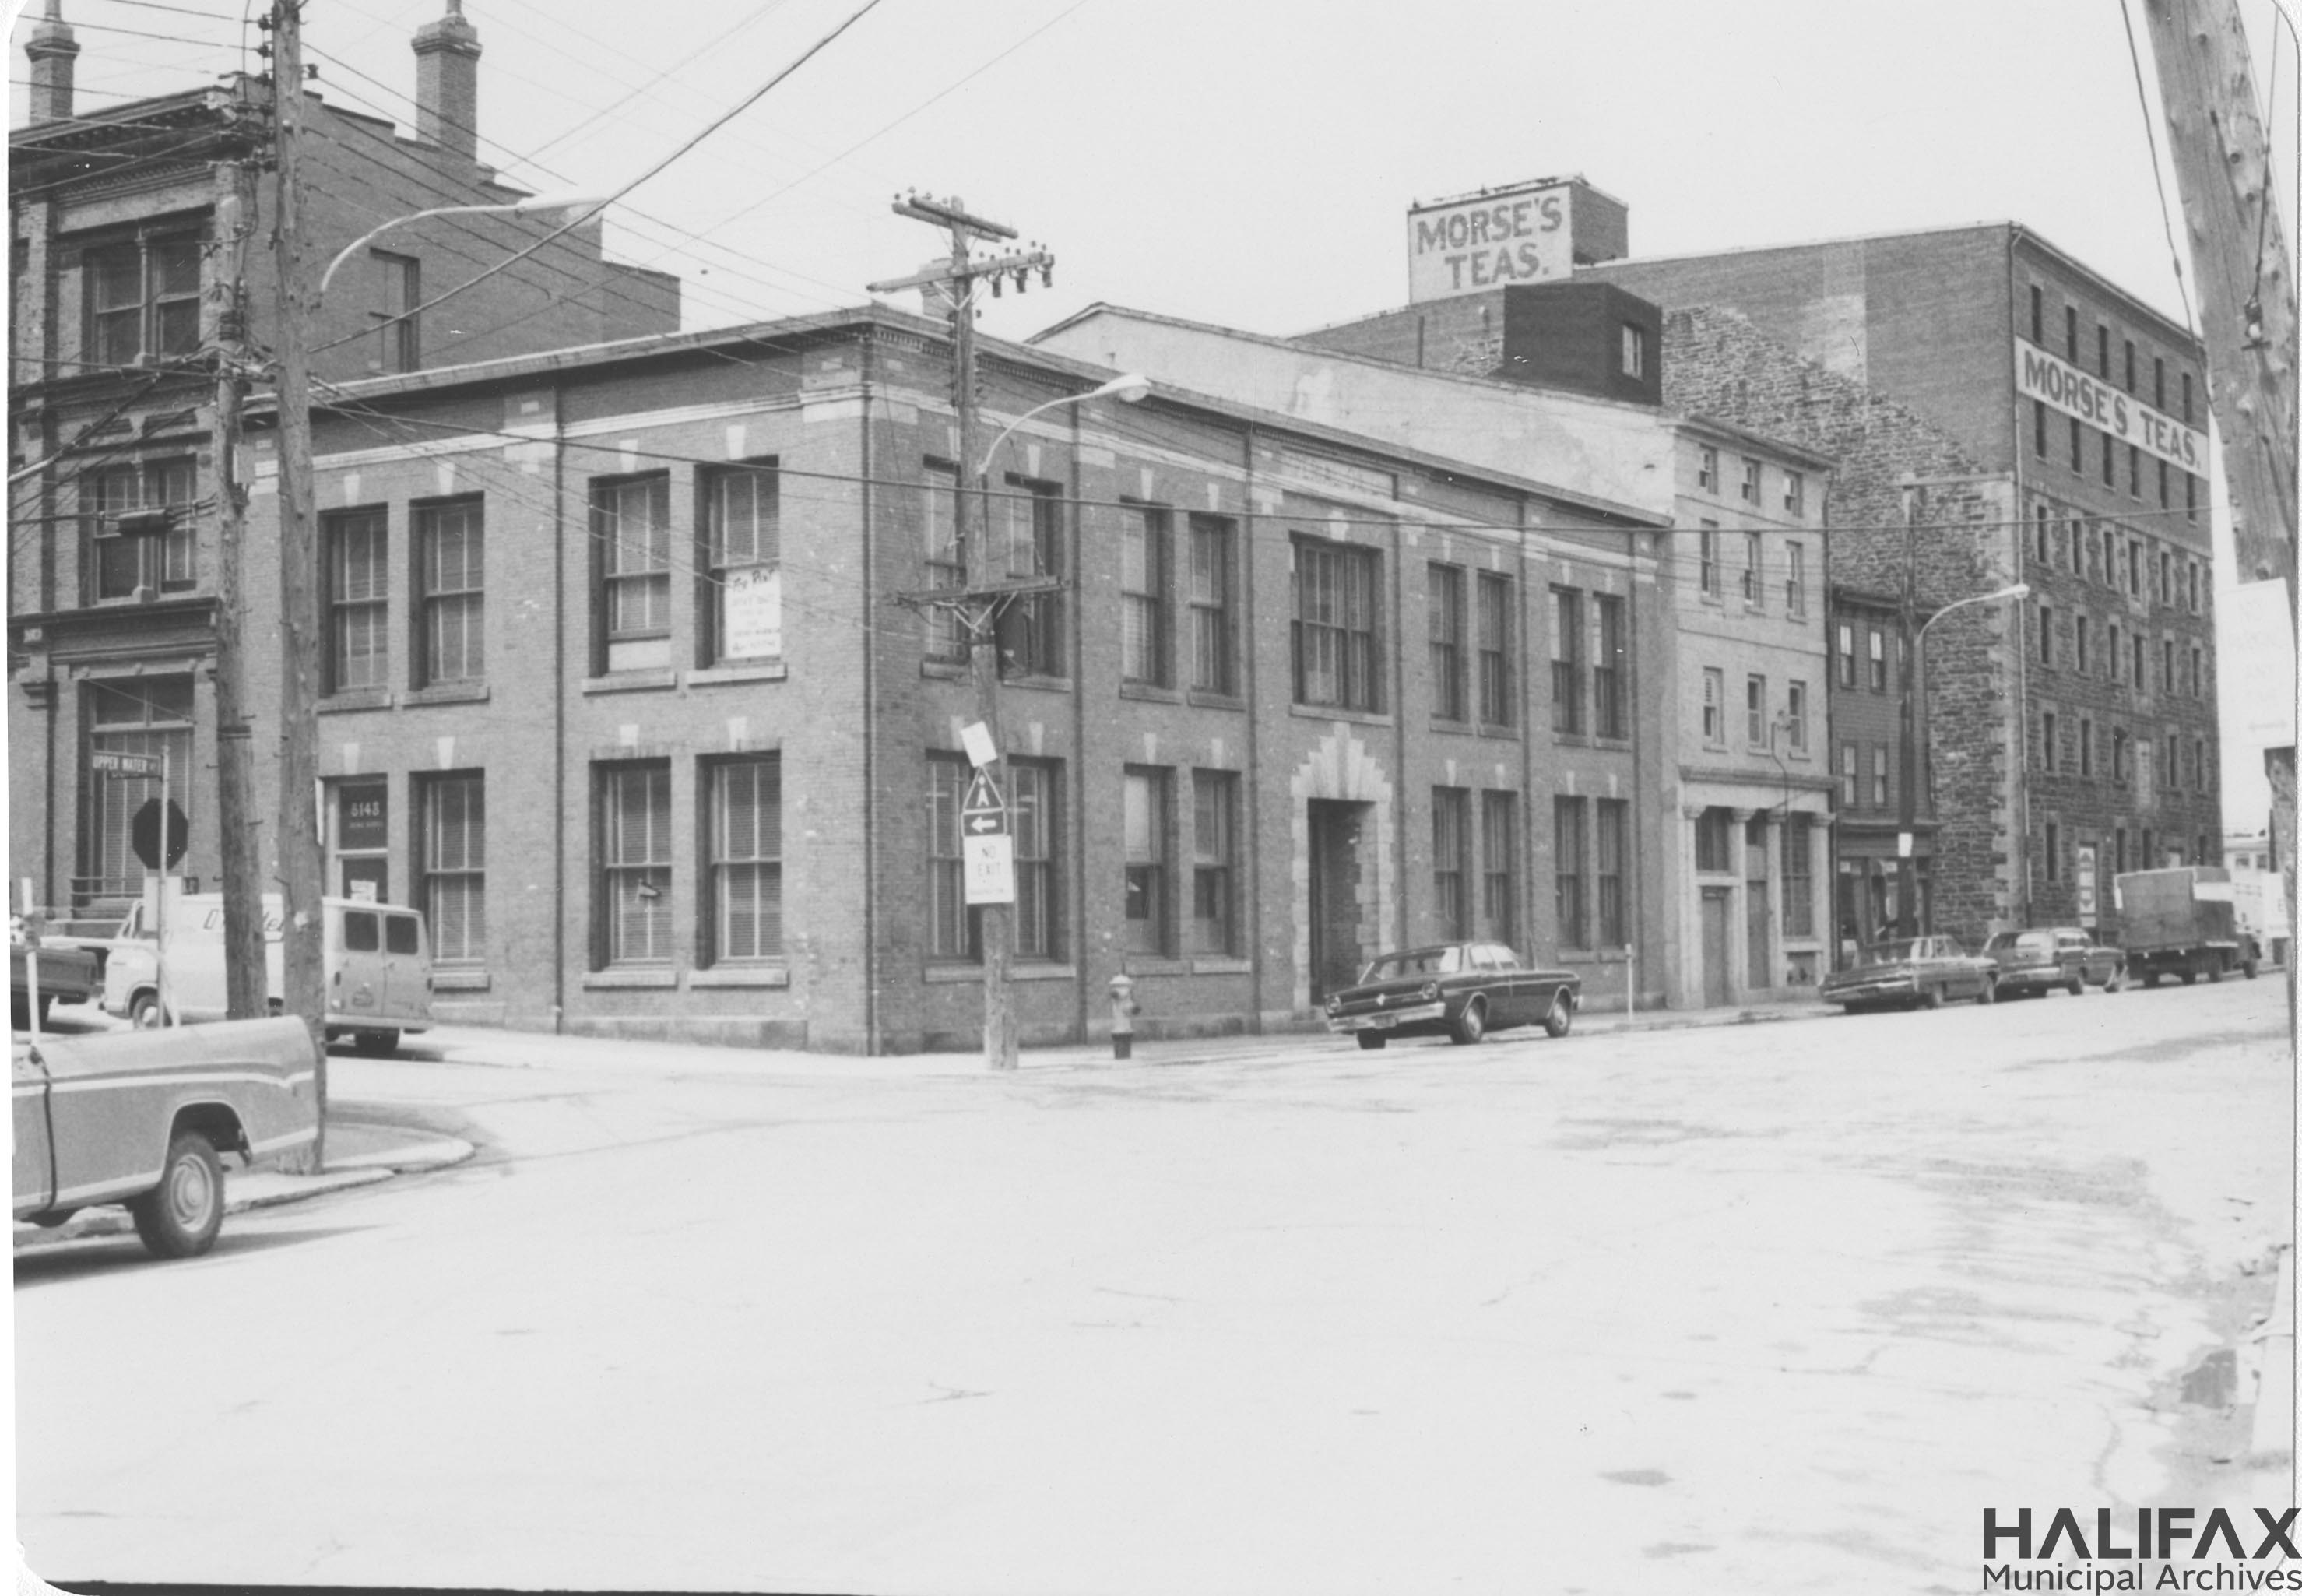 Black and white photo of a row of buildings on a street corner; the Morse's Tea building is on the far right.